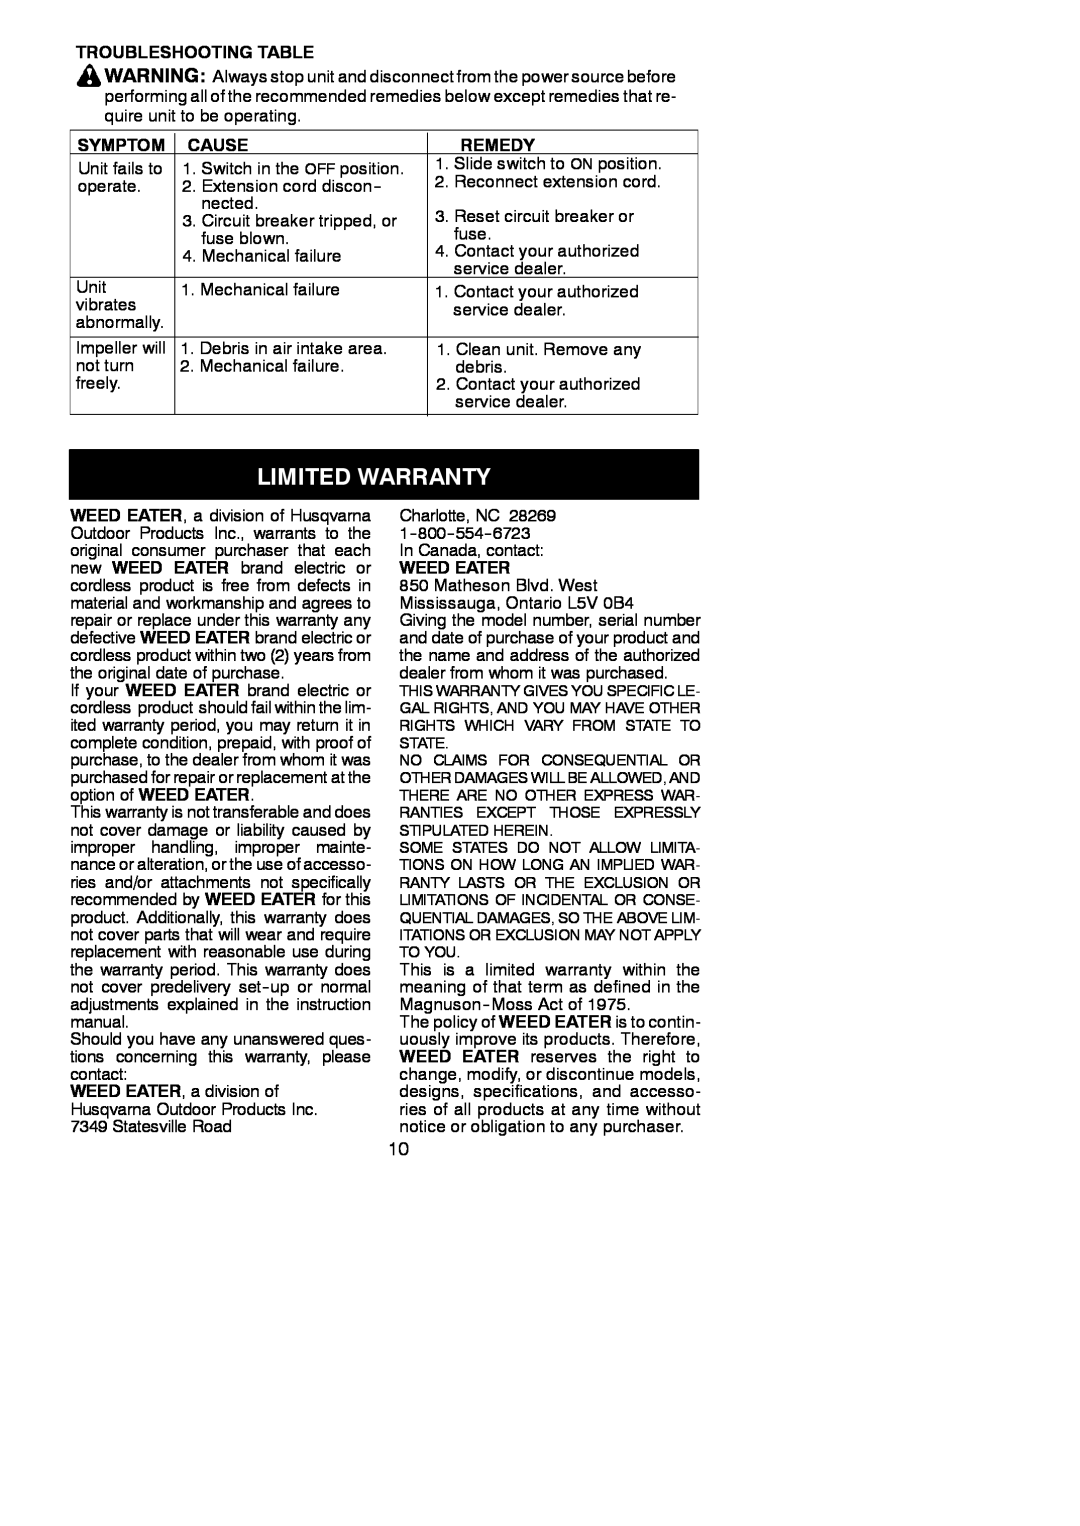 Weed Eater 952711474 instruction manual Limited Warranty, Troubleshooting Table, Symptom, Cause, Remedy, Weed Eater 